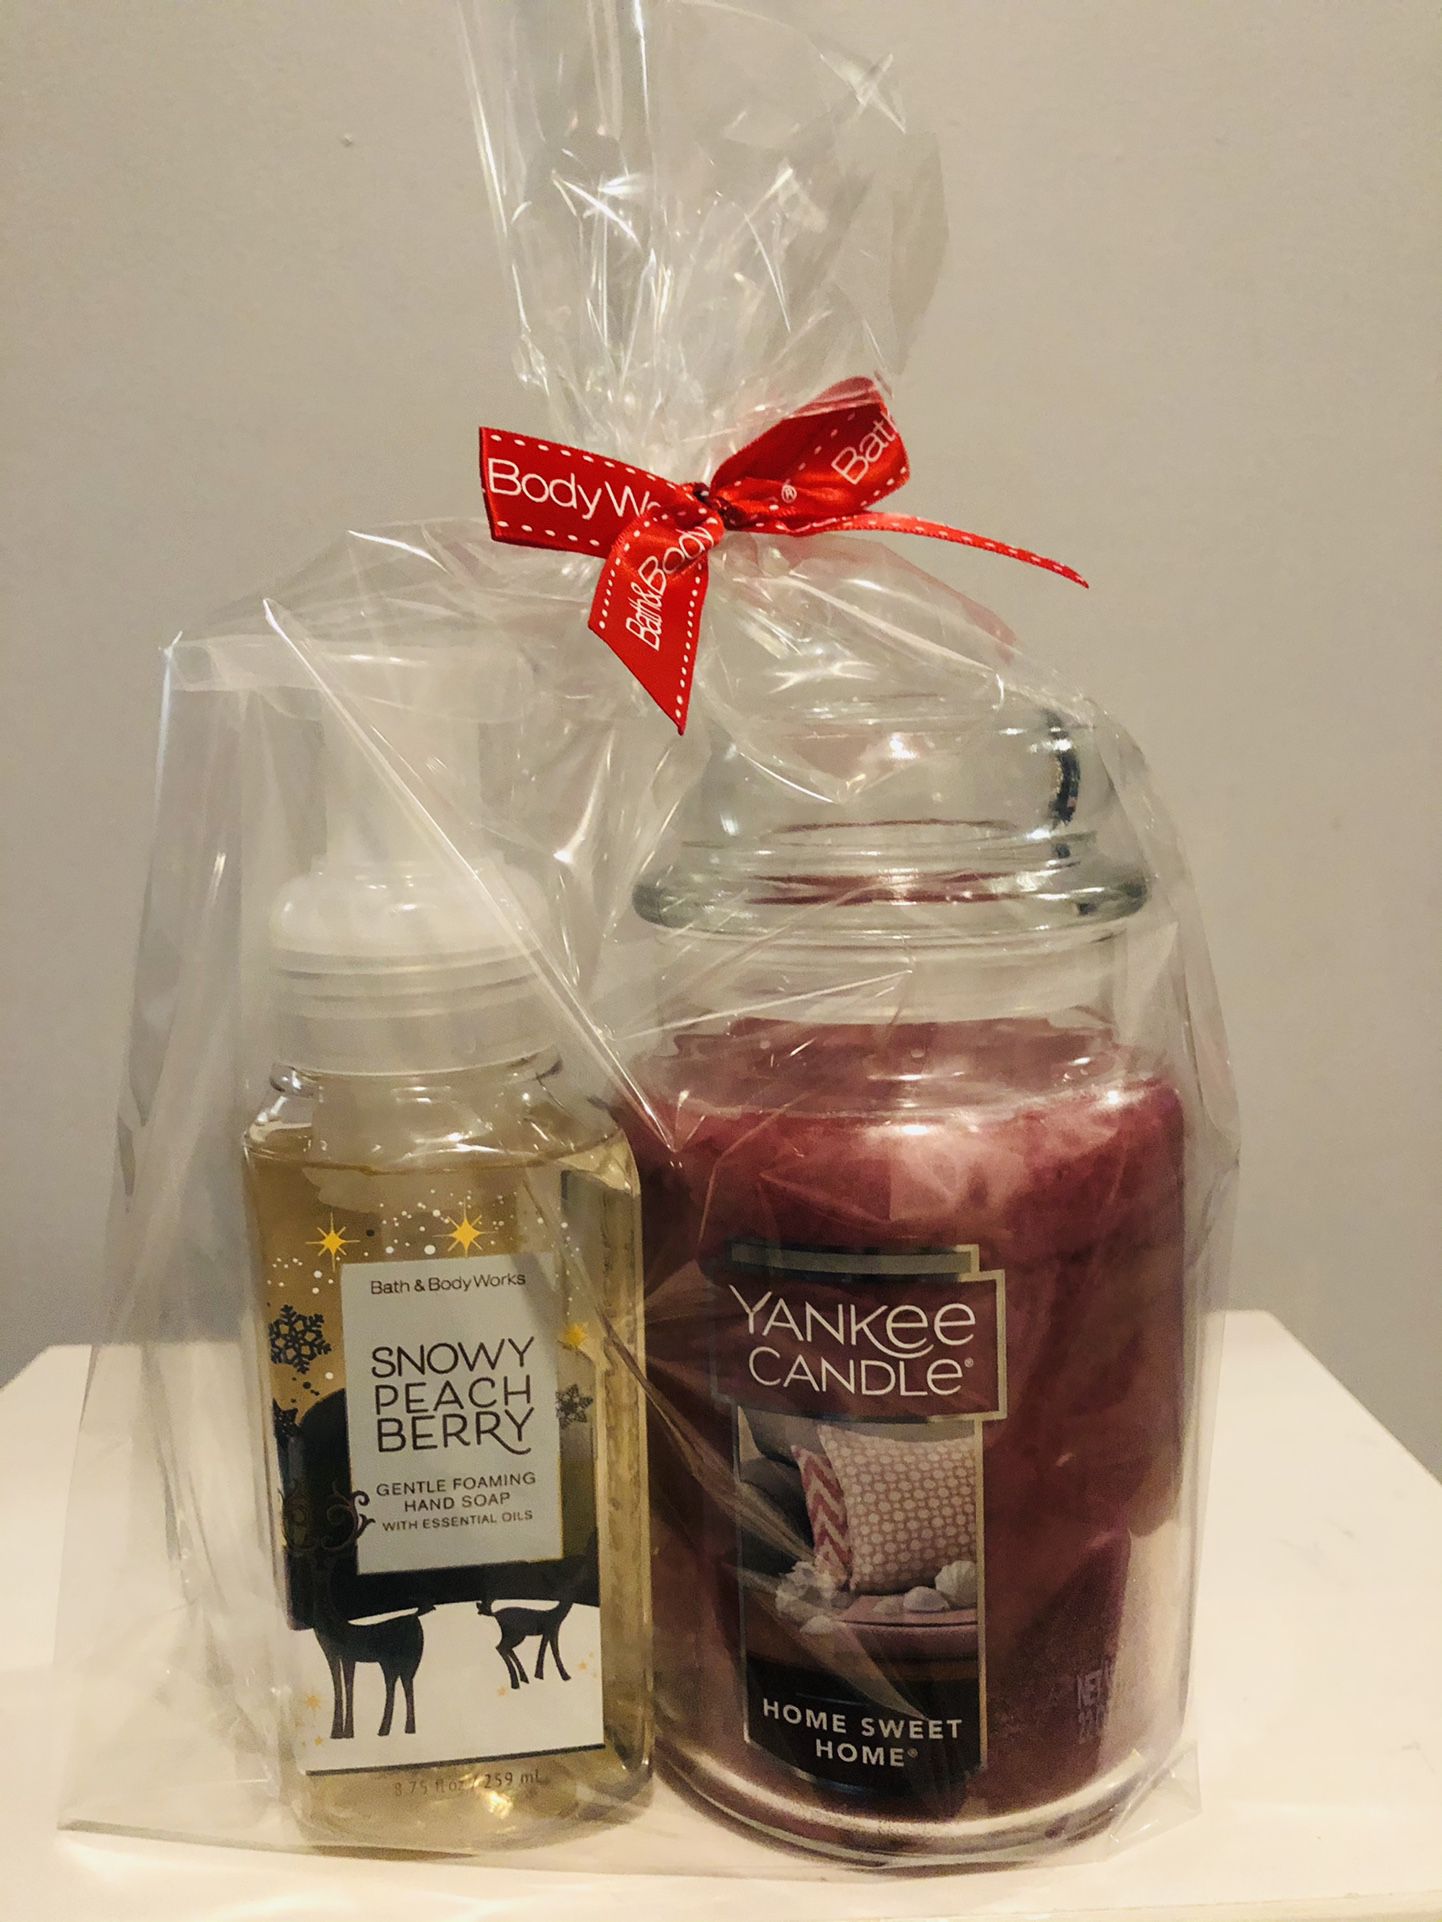 $20 For This Gift Set 1 Bath And Body Work Hand Soap And 1 Yankee candle It’s All Brand New And Pick Up gahanna